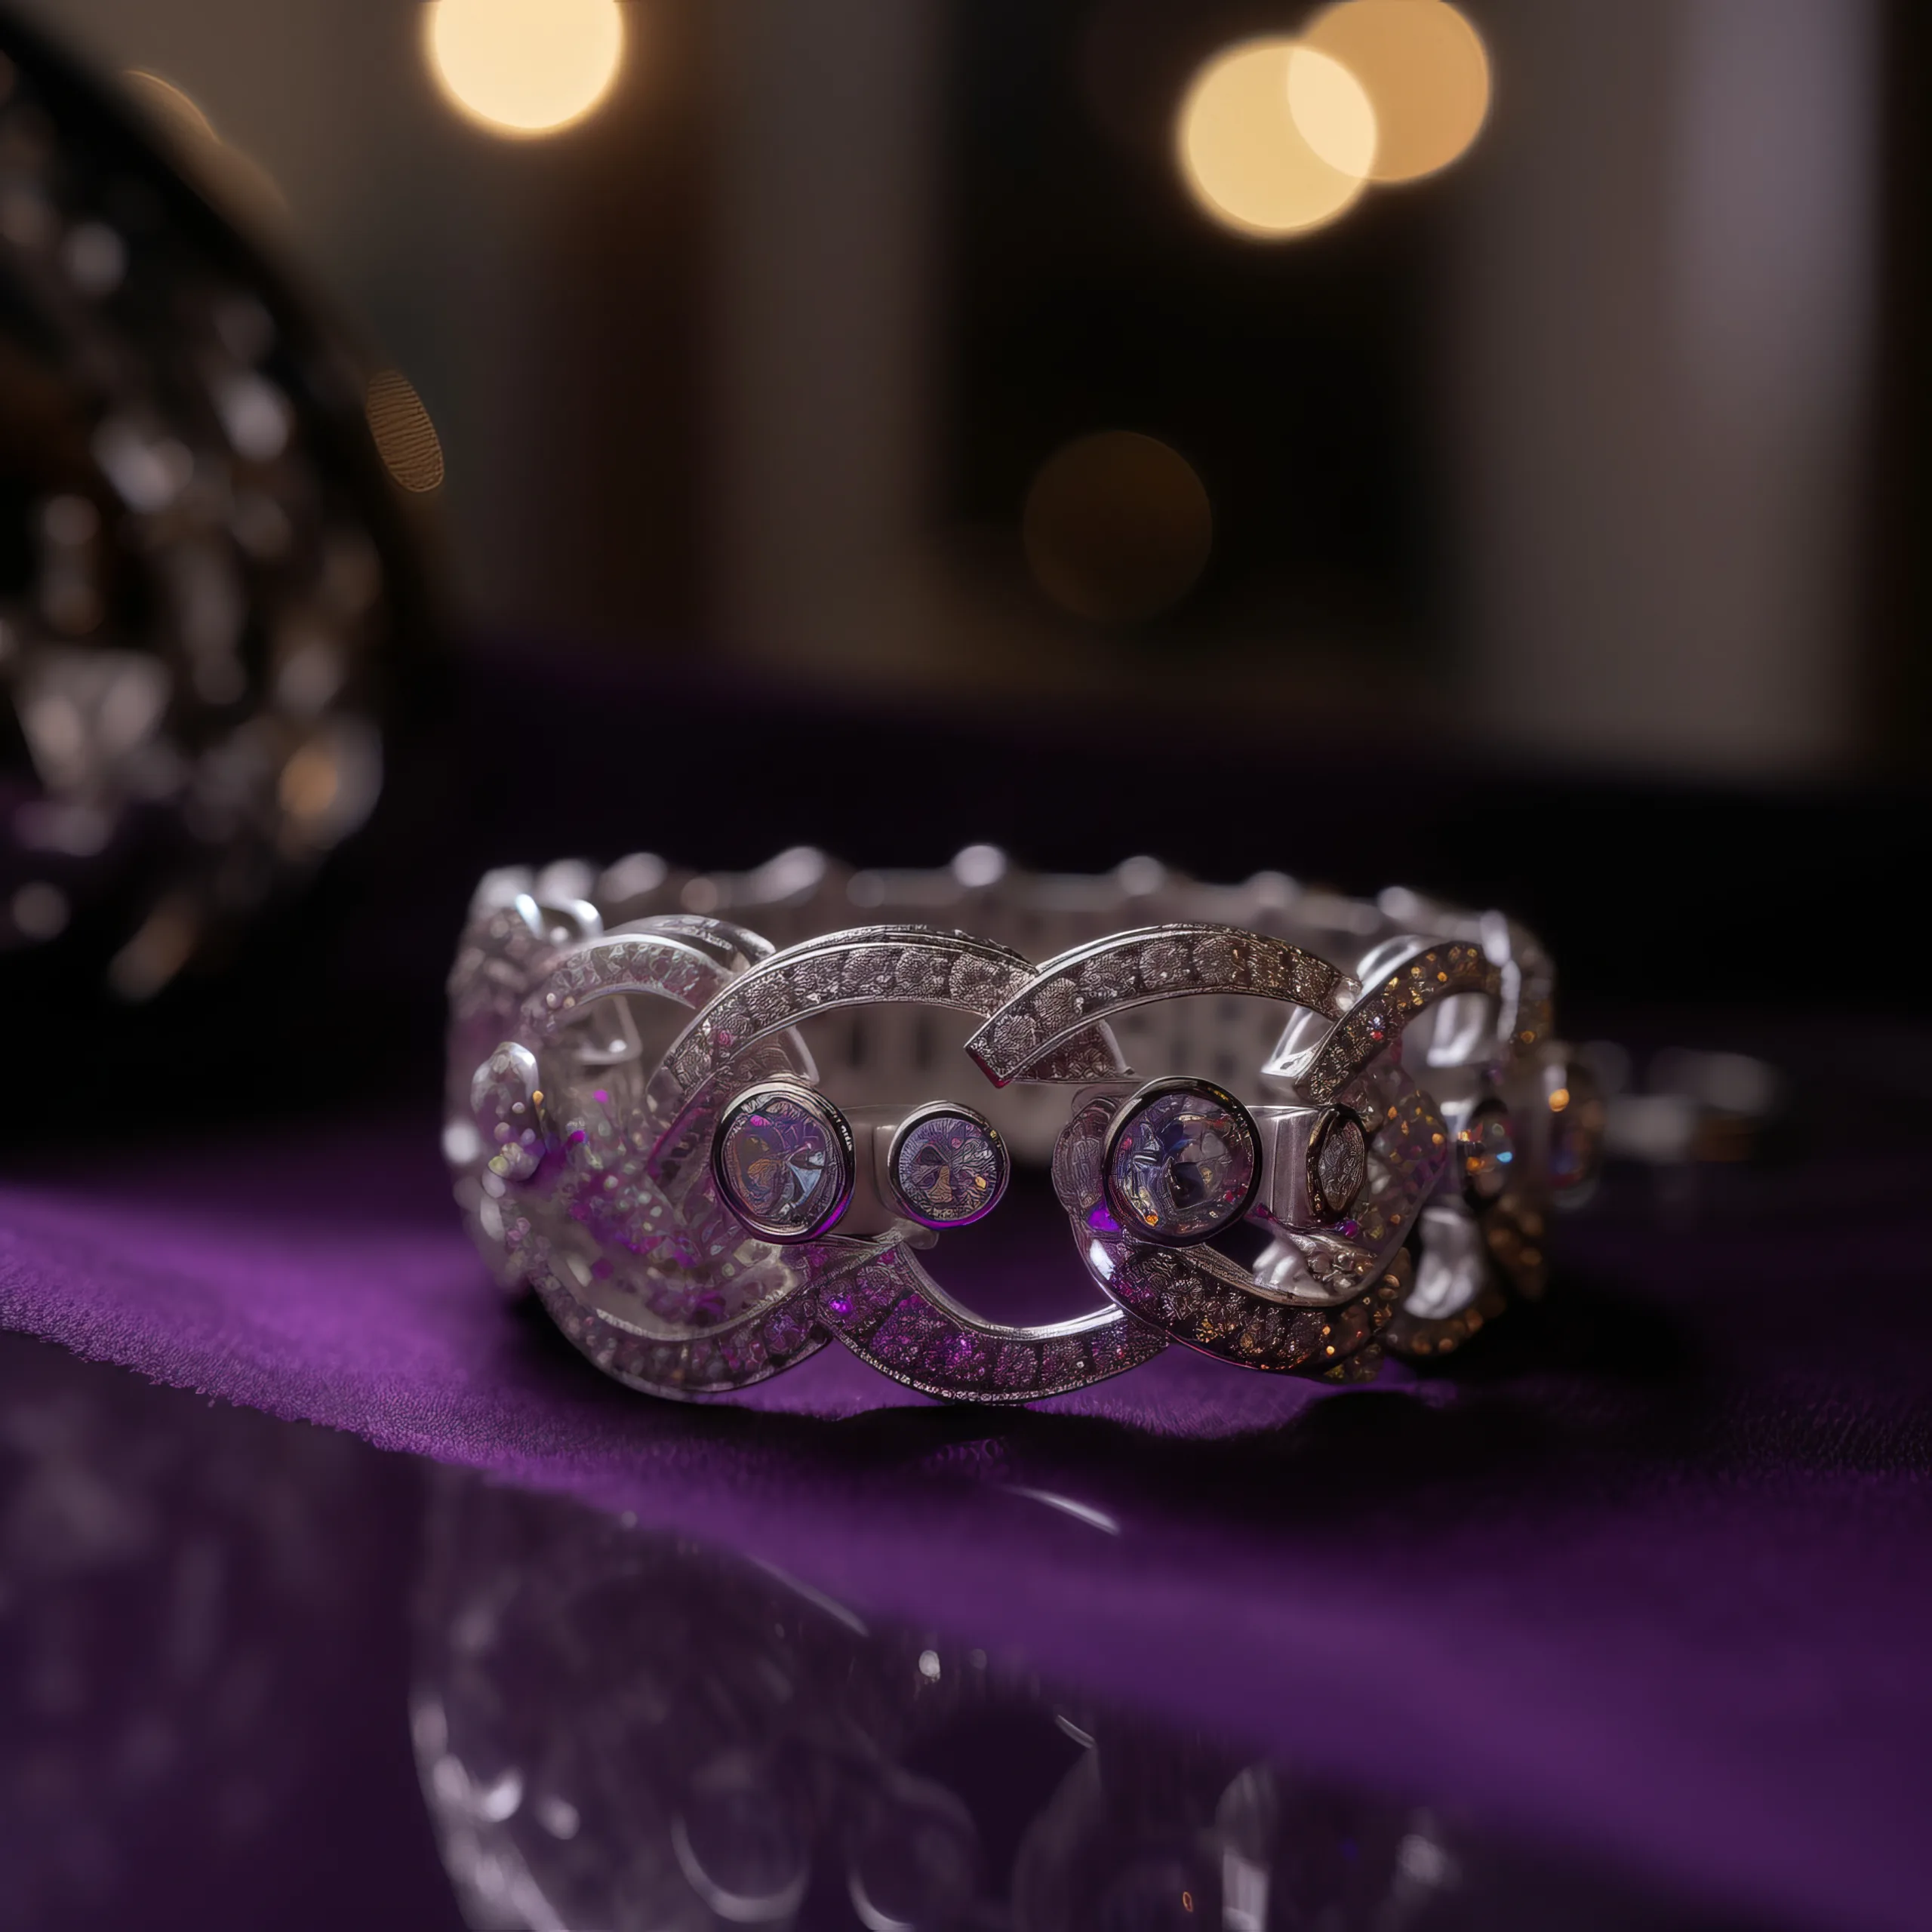 Wedding jewellery:a close up of a ring on a table.